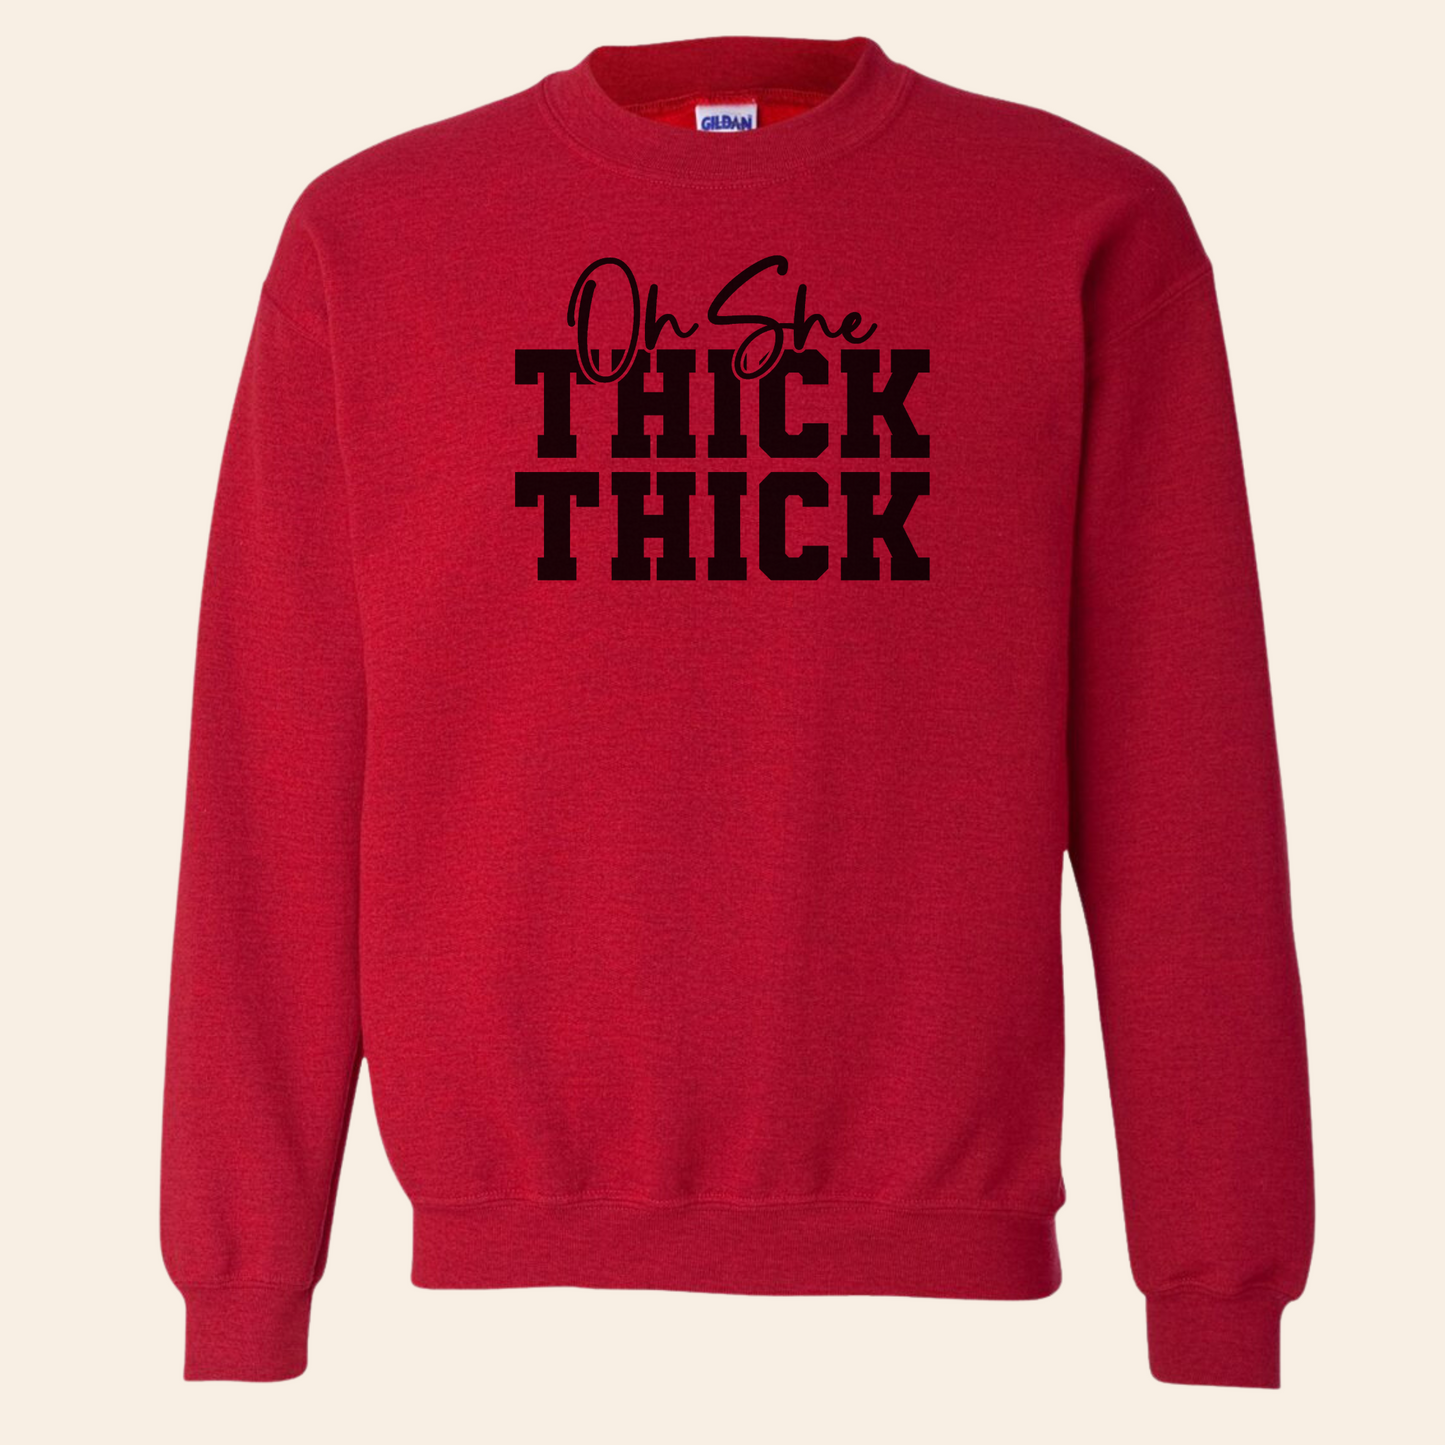 Oh She Thick Thick Sweatshirt